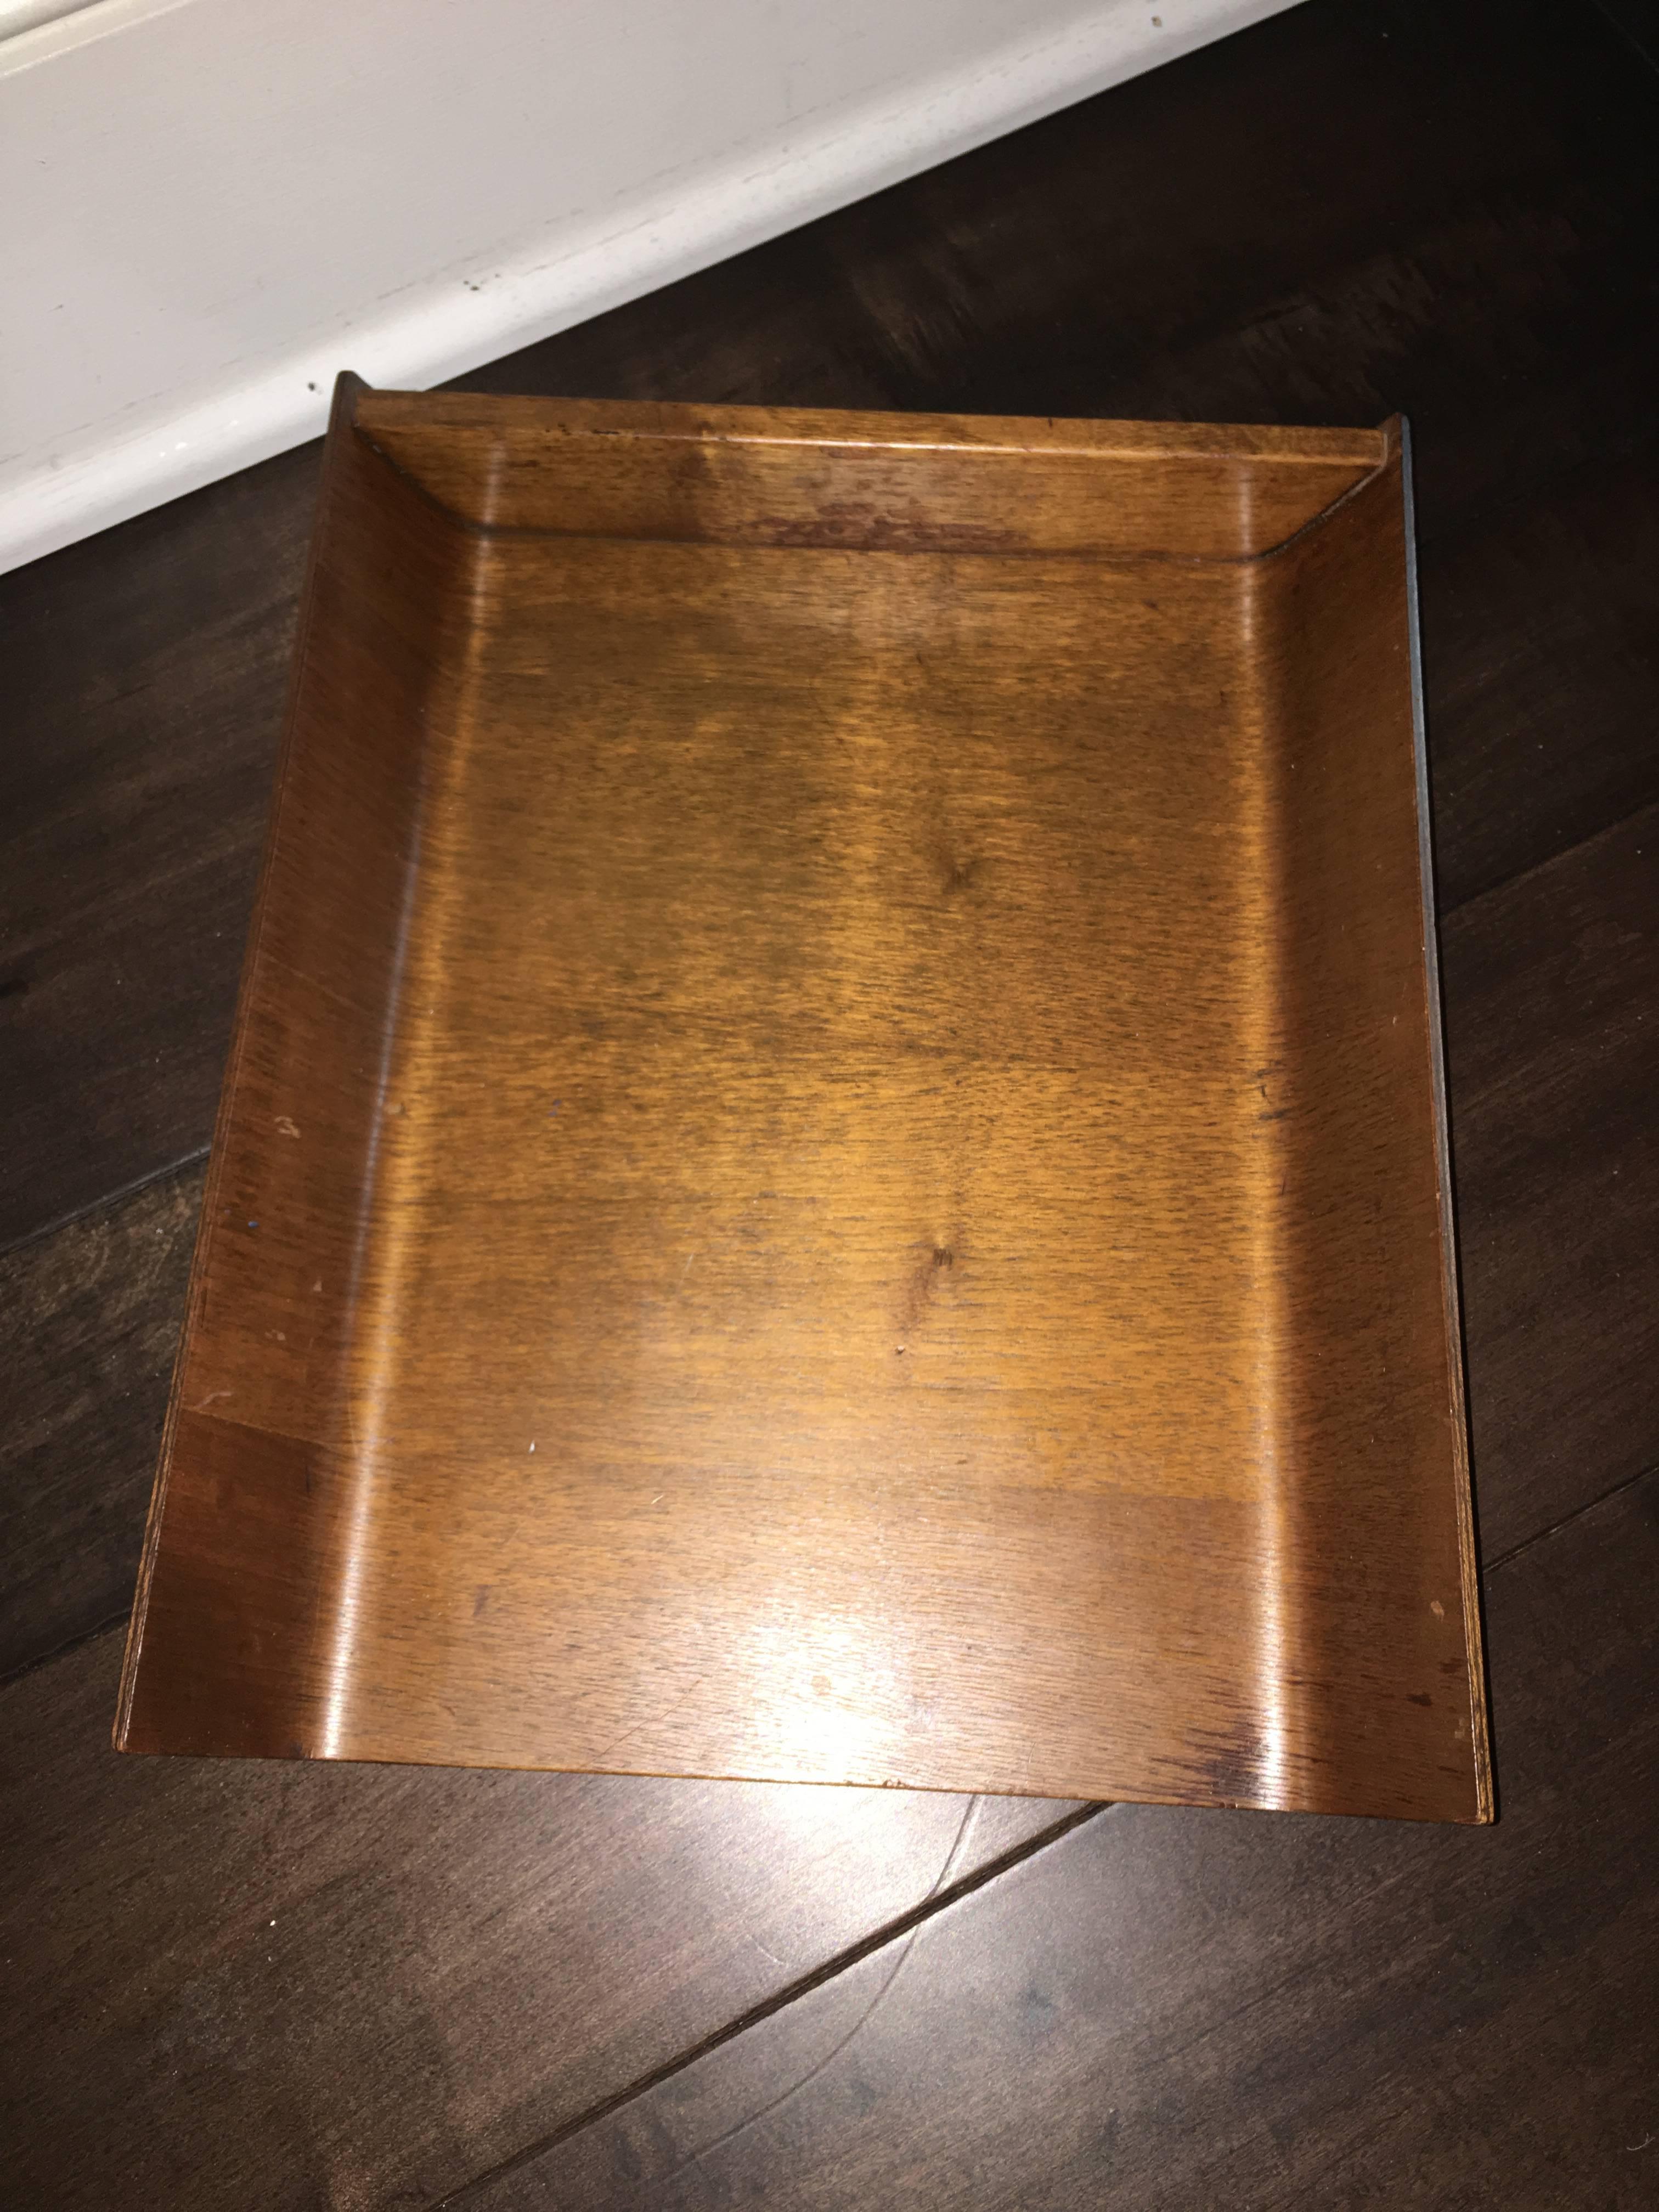 Knoll Associates early wood desk or letter tray. Comprised of sculptural solid wood. Signed Knoll Associates.